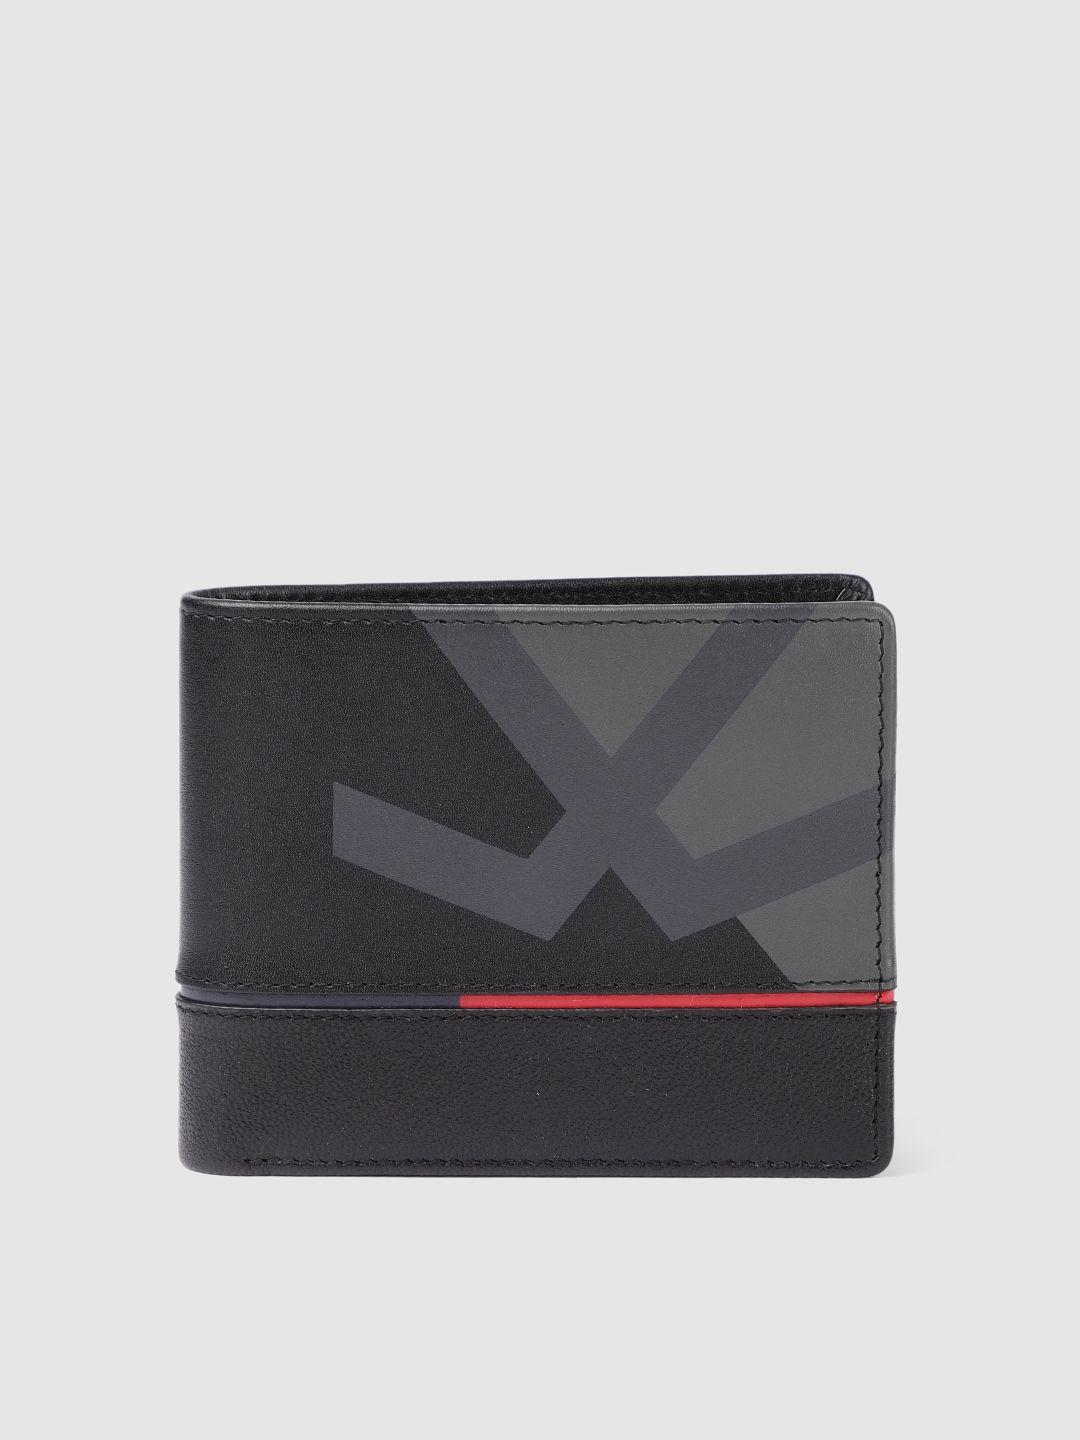 wrogn-men-brand-logo-printed-leather-two-fold-wallet